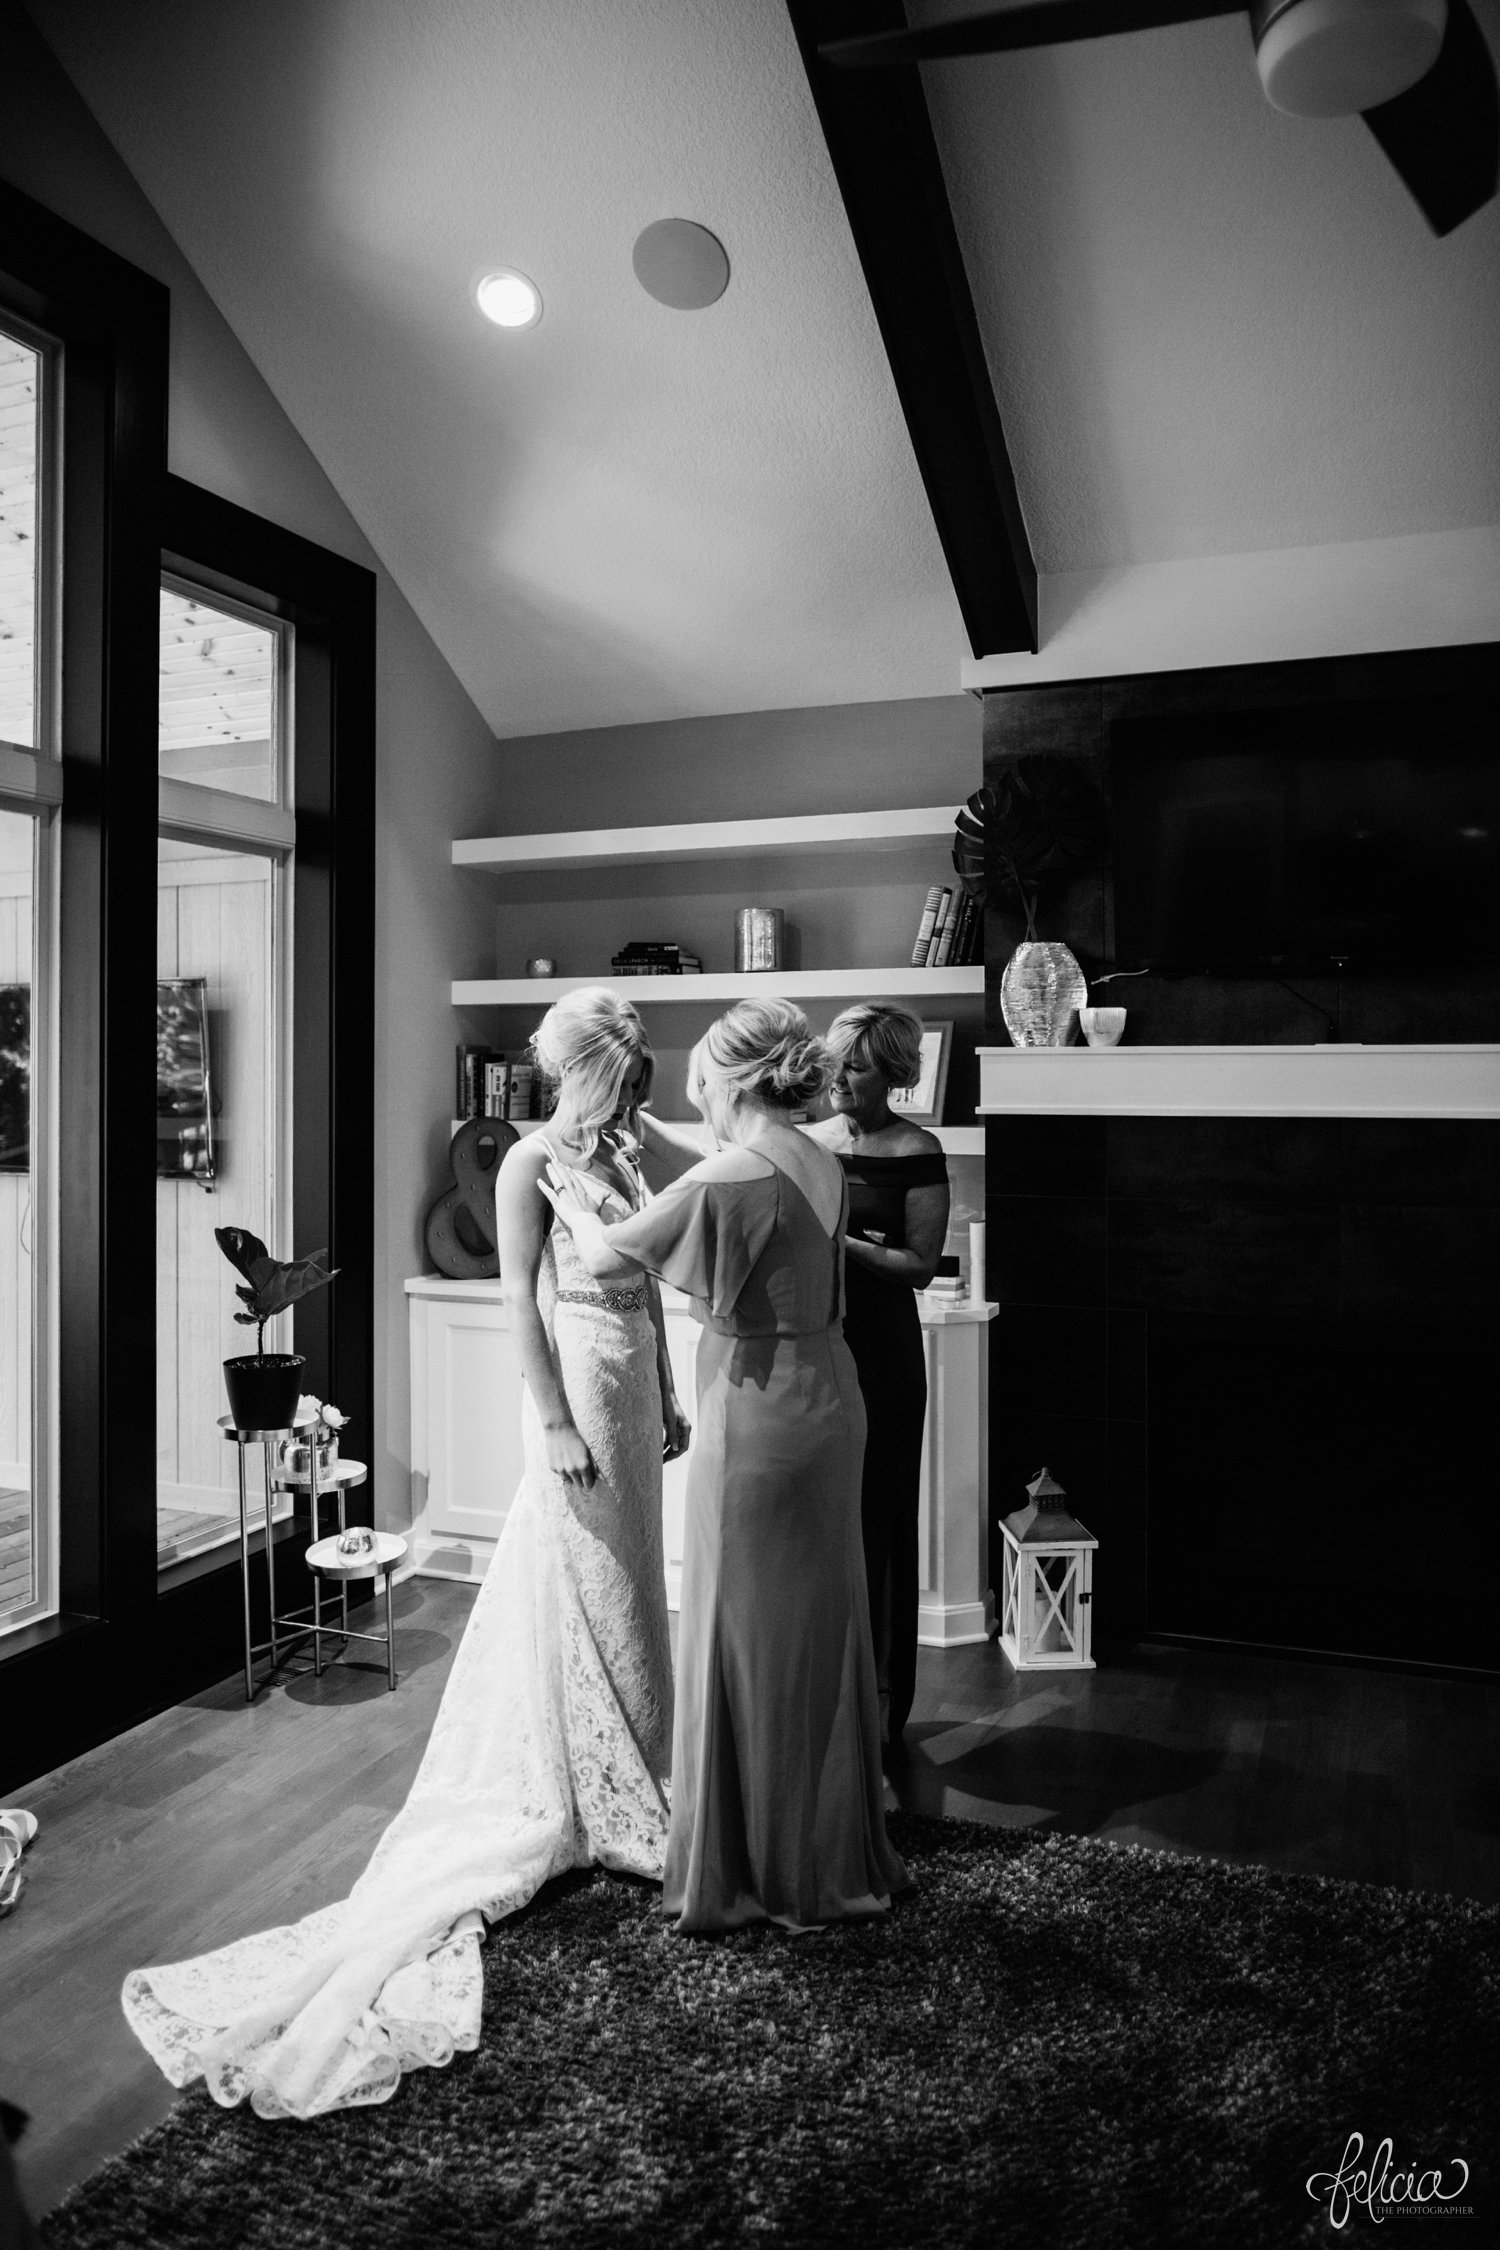 images by feliciathephotographer.com | destination wedding photographer | kansas city | getting ready | details | pre ceremony | putting on the dress | cross backed dress | fabulous frocks kc | lace skirt | black and white | 